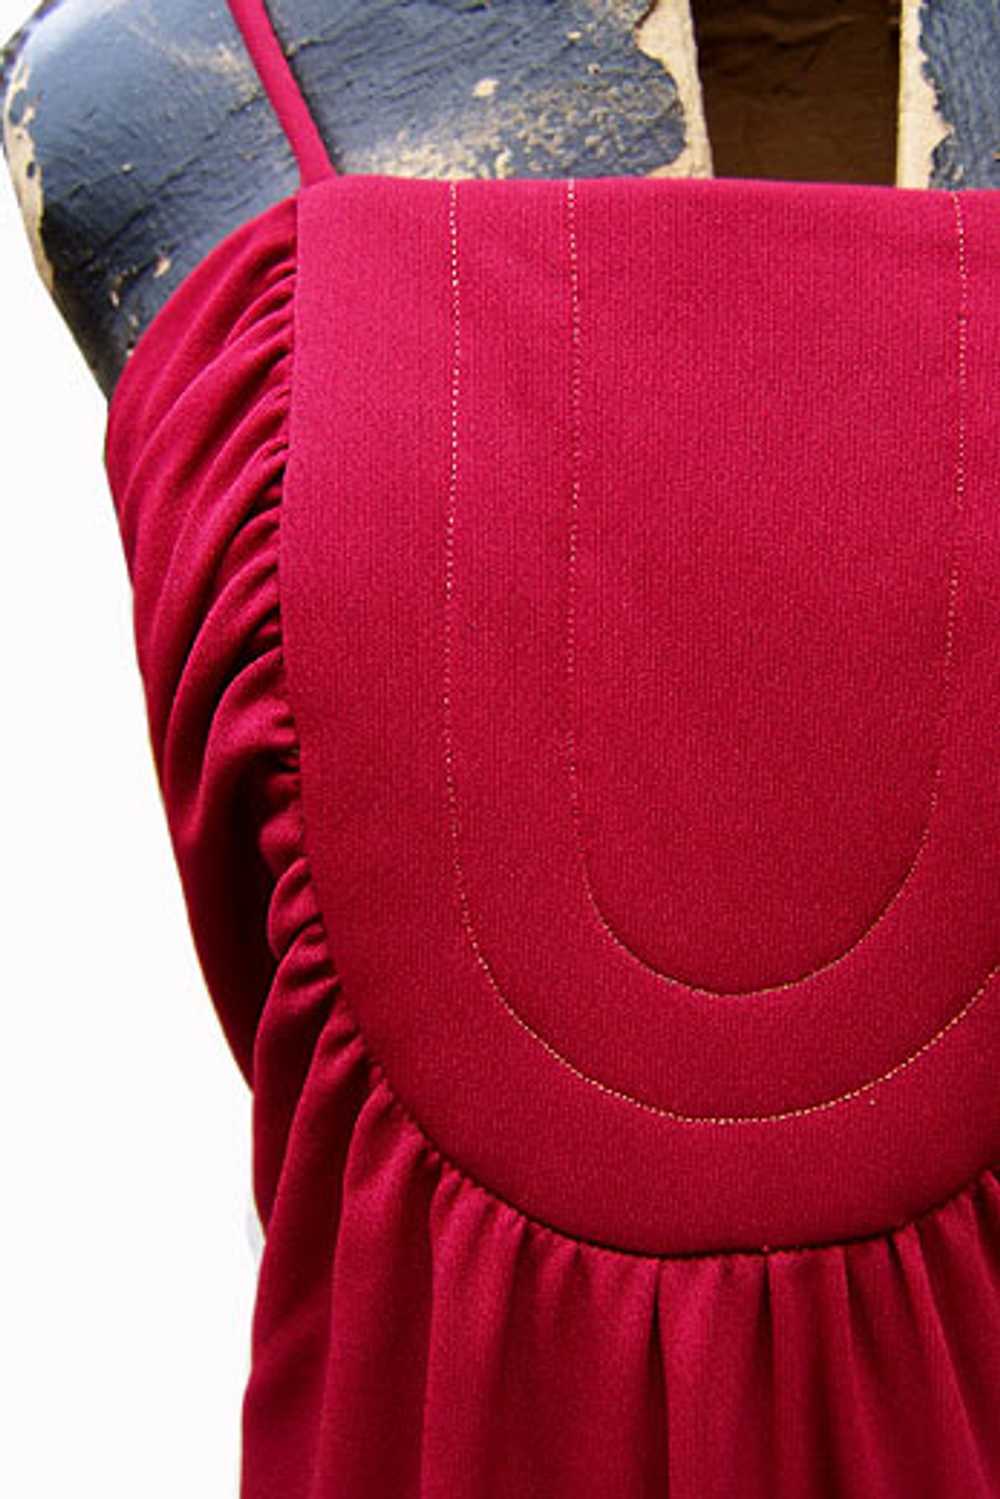 Cranberry trapunto gown - image 4